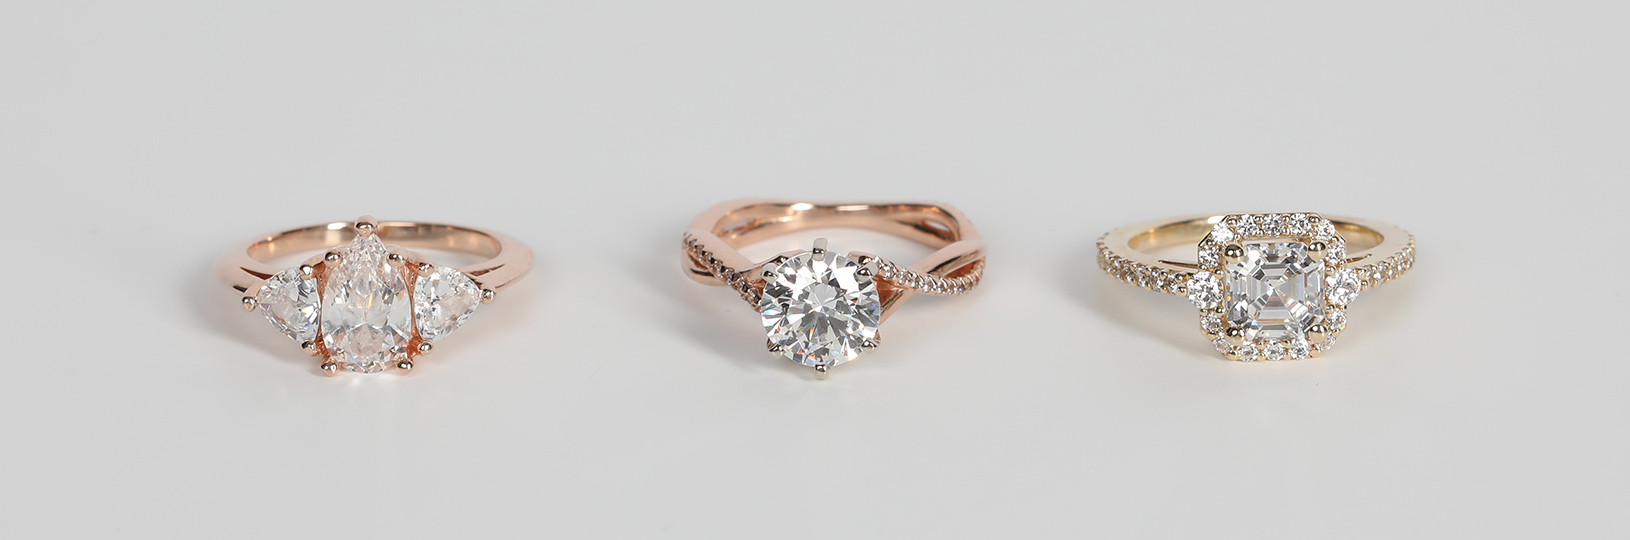 Affordable engagement rings set with lab created diamond simulants.